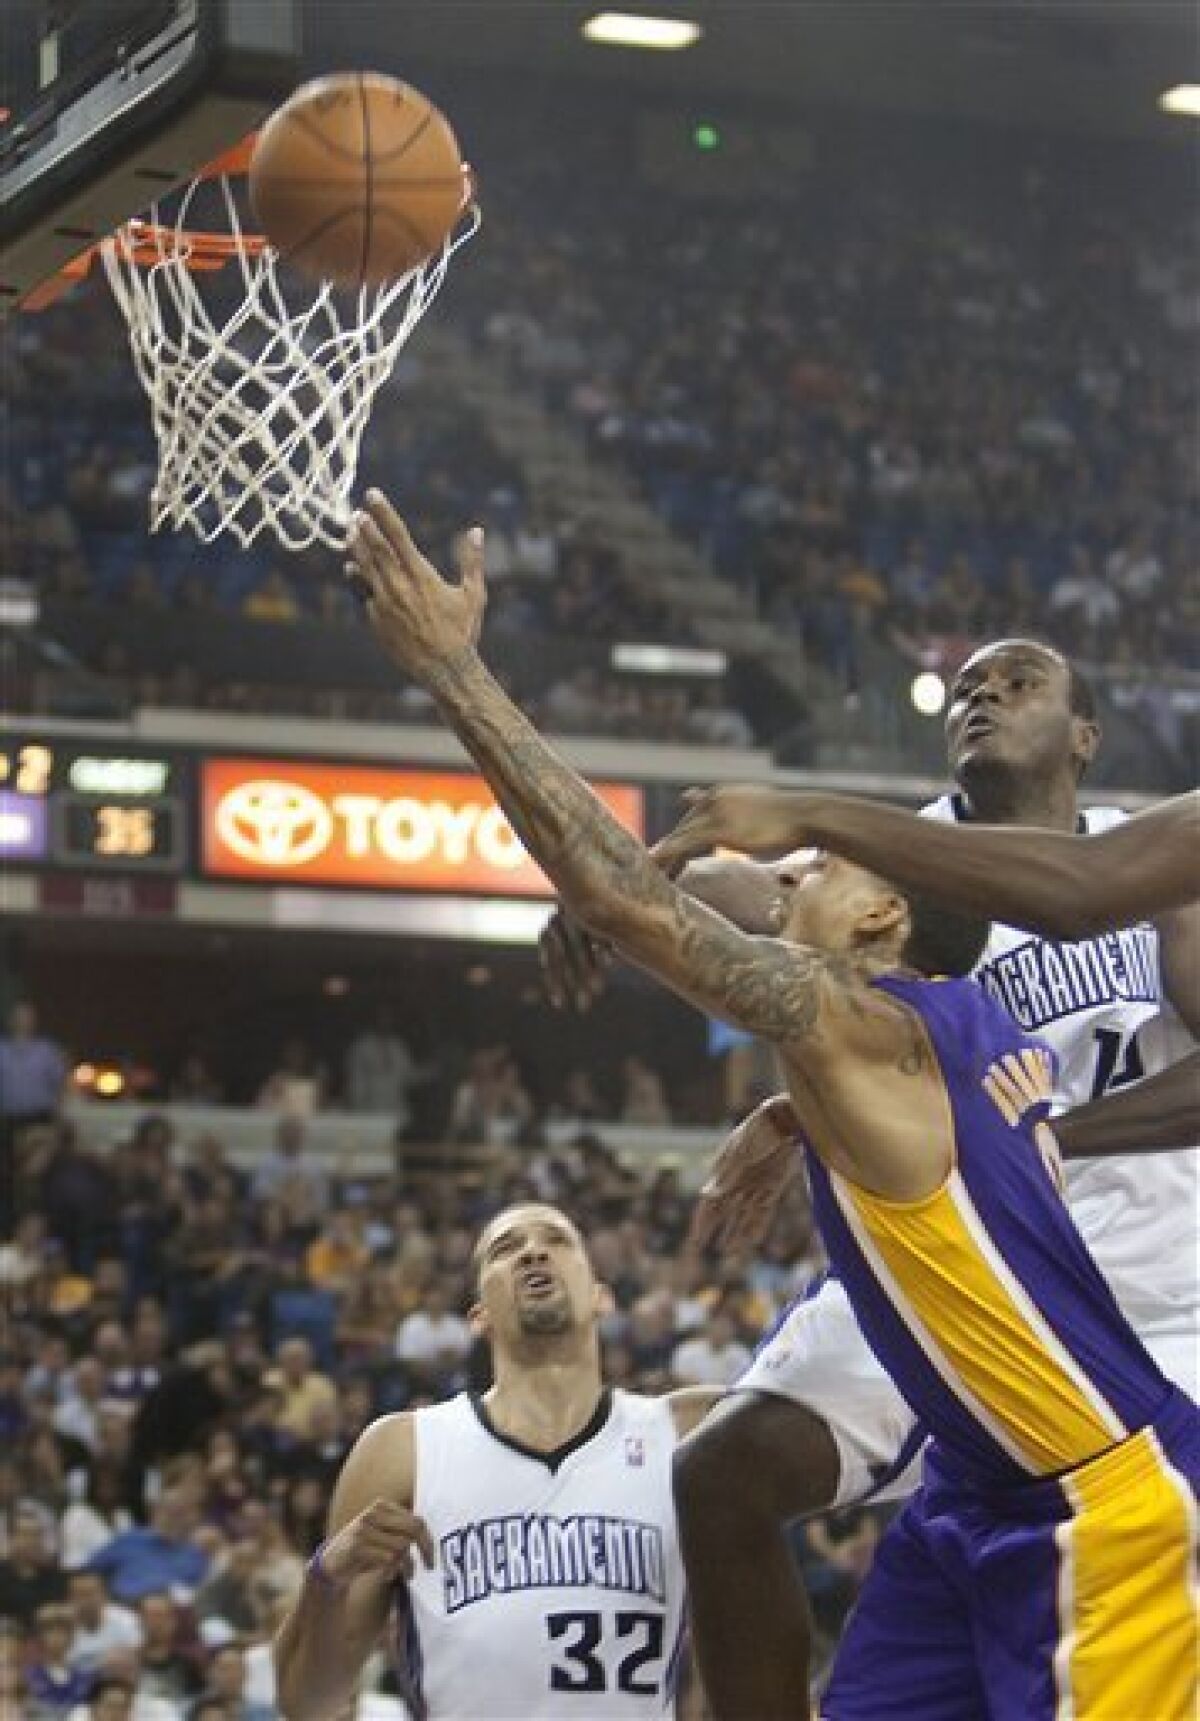 Los Angeles Lakers' Matt Barnes, center, drives for a a basket in the first half as the Sacramento Kings' Francisco Garcia (32), left and Samuel Dalembert (10), right guard on the play in the first half in Sacramento, Calif., Wednesday Nov. 3, 2010. (AP Photo/Robert Durell)